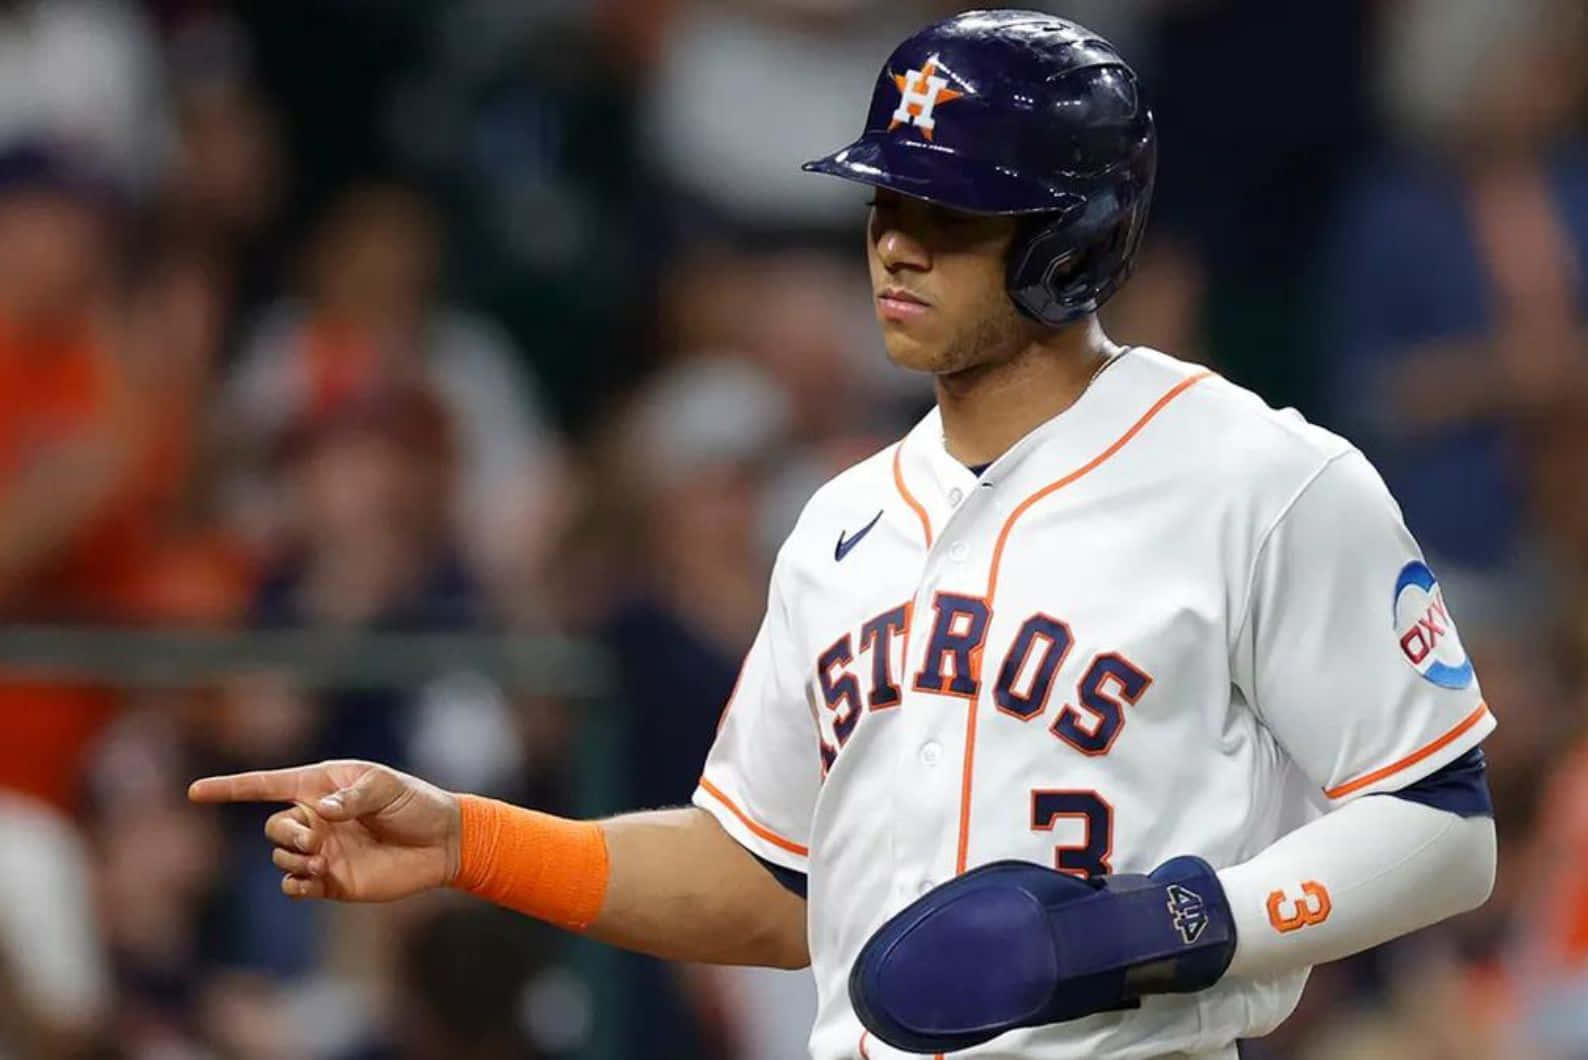 Astros Player Gesture During Game Wallpaper